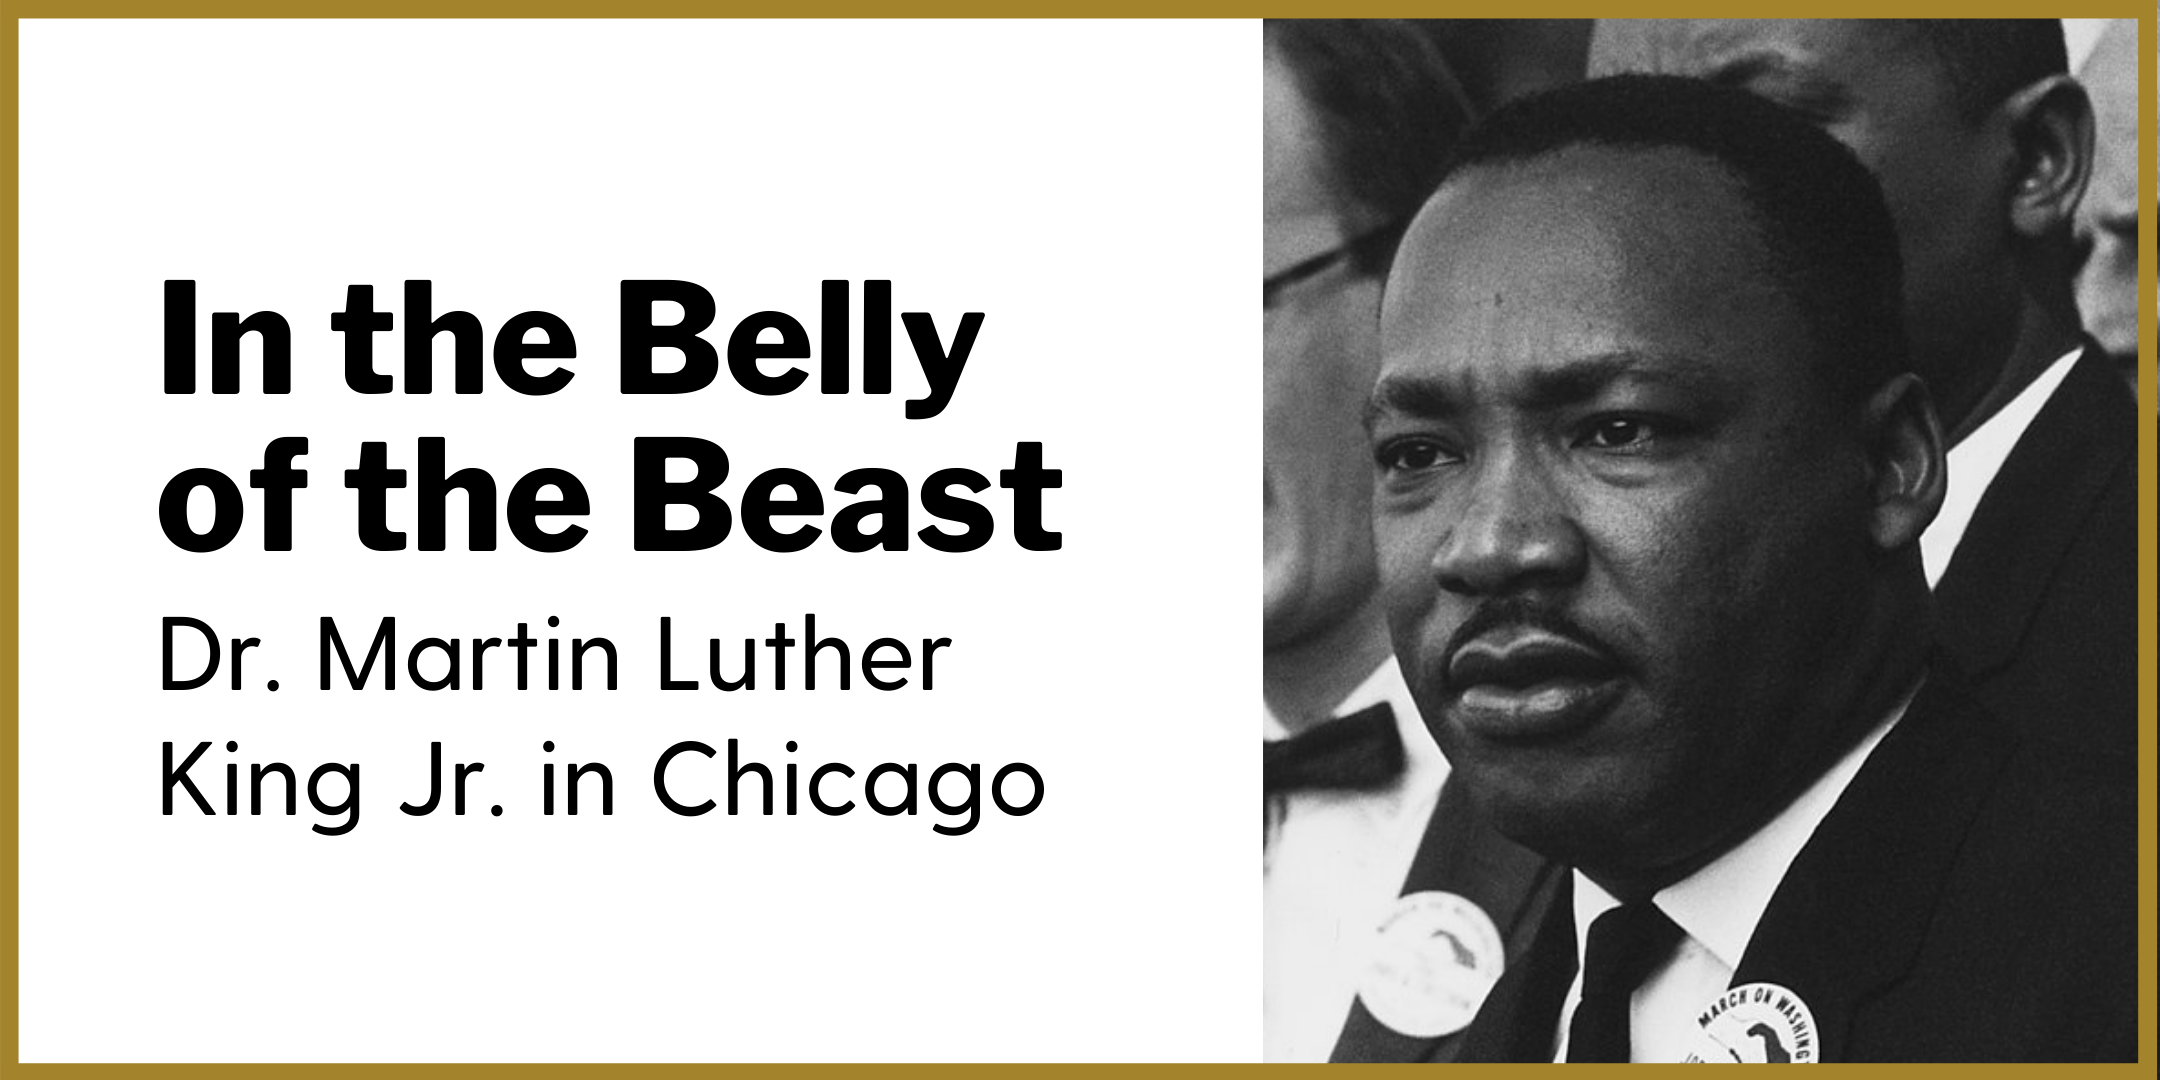 In the Belly of the Beast: Dr. Martin Luther King Jr. in Chicago